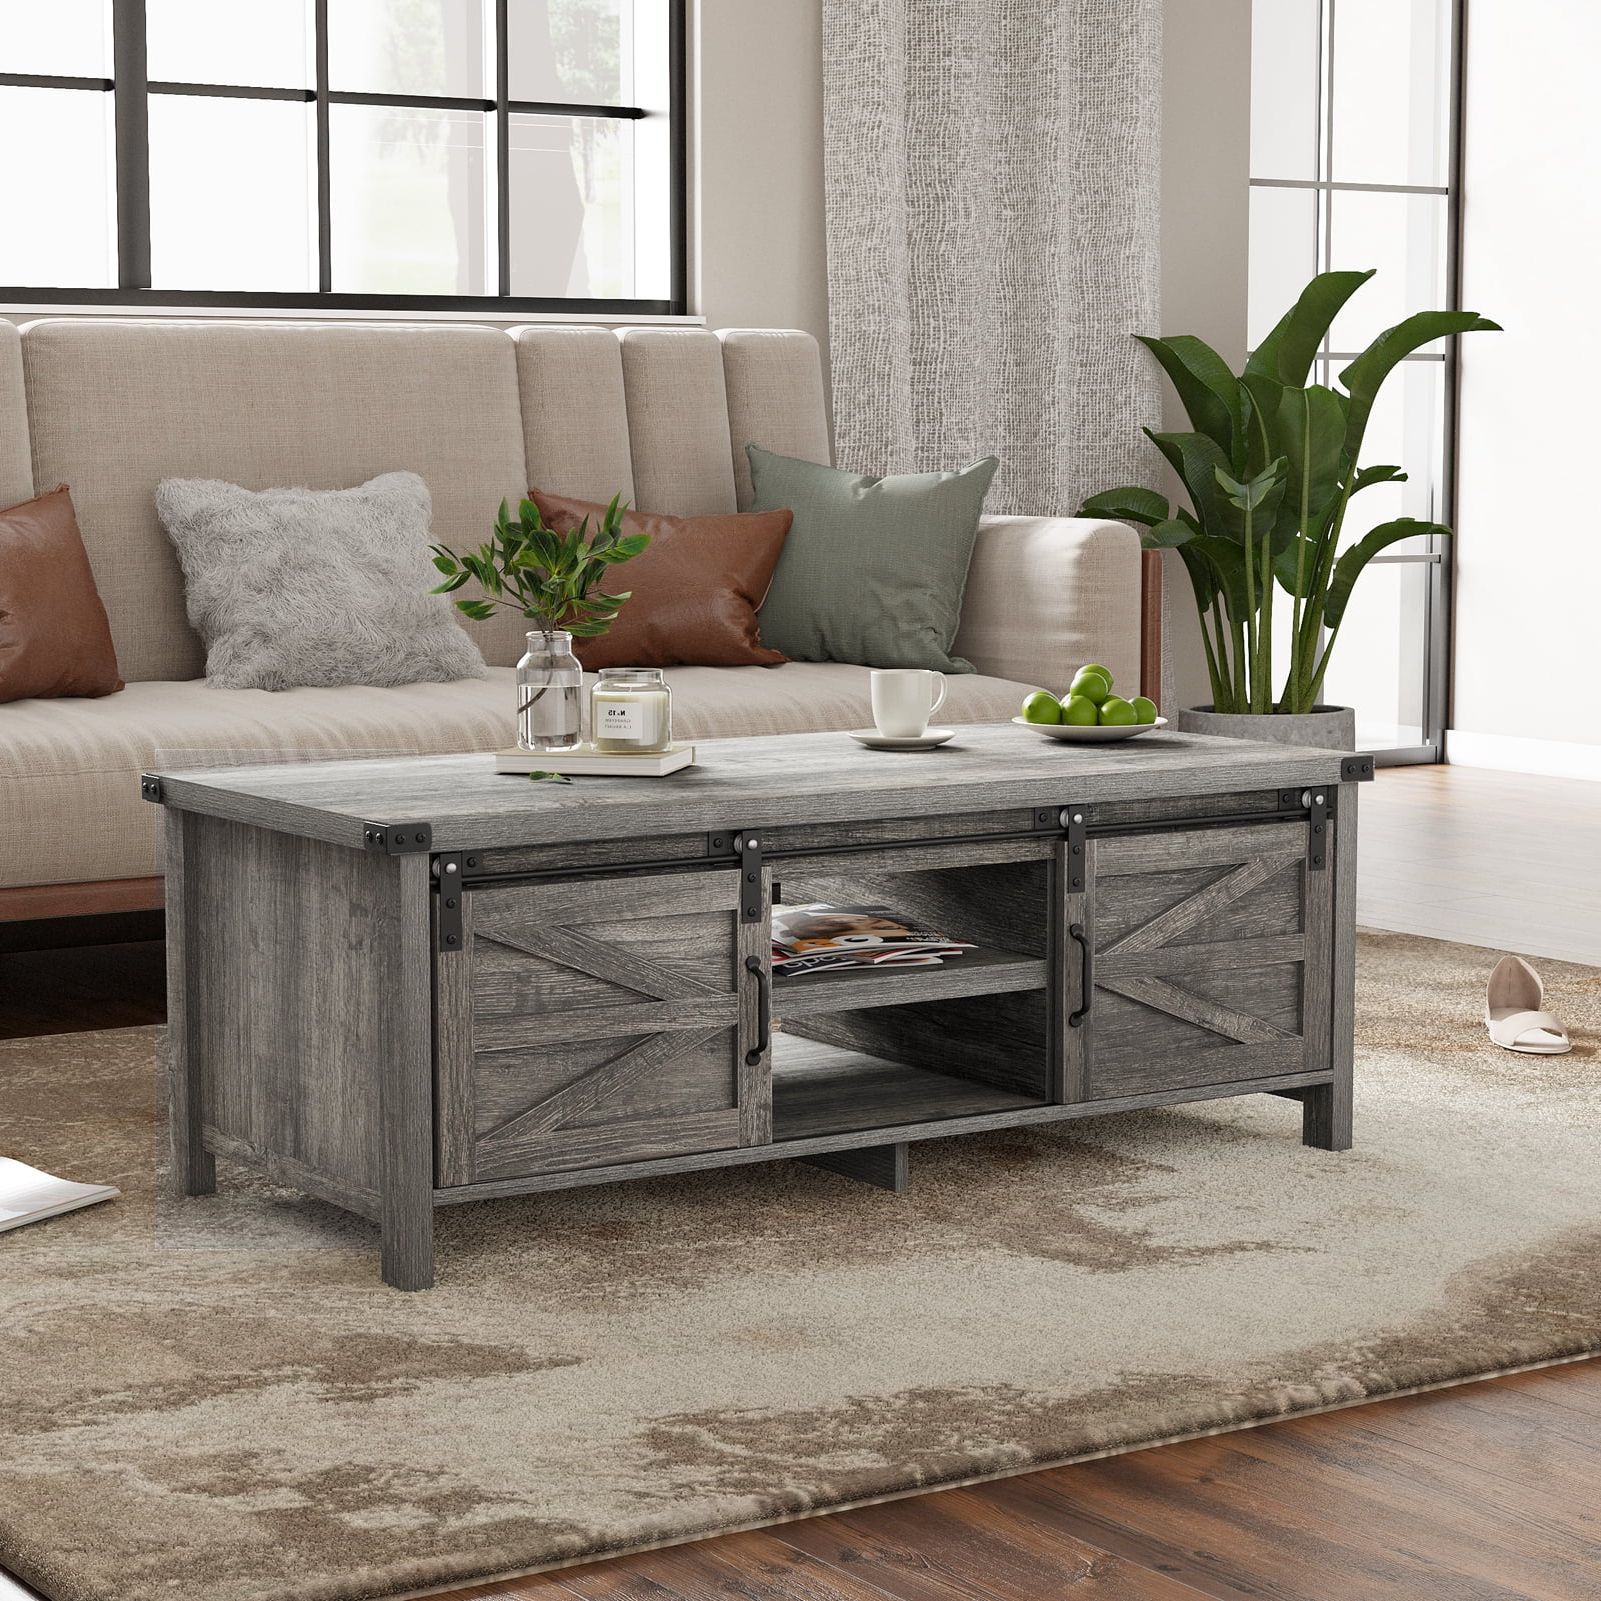 Widely Used Yaoping 48" Modern Farmhouse Coffee Table With Adjustable Storage Cabinets  Shelves, Modern Coffee Table For Living Room With Sliding Barn Door –  Walmart In Coffee Tables With Sliding Barn Doors (Photo 10 of 10)